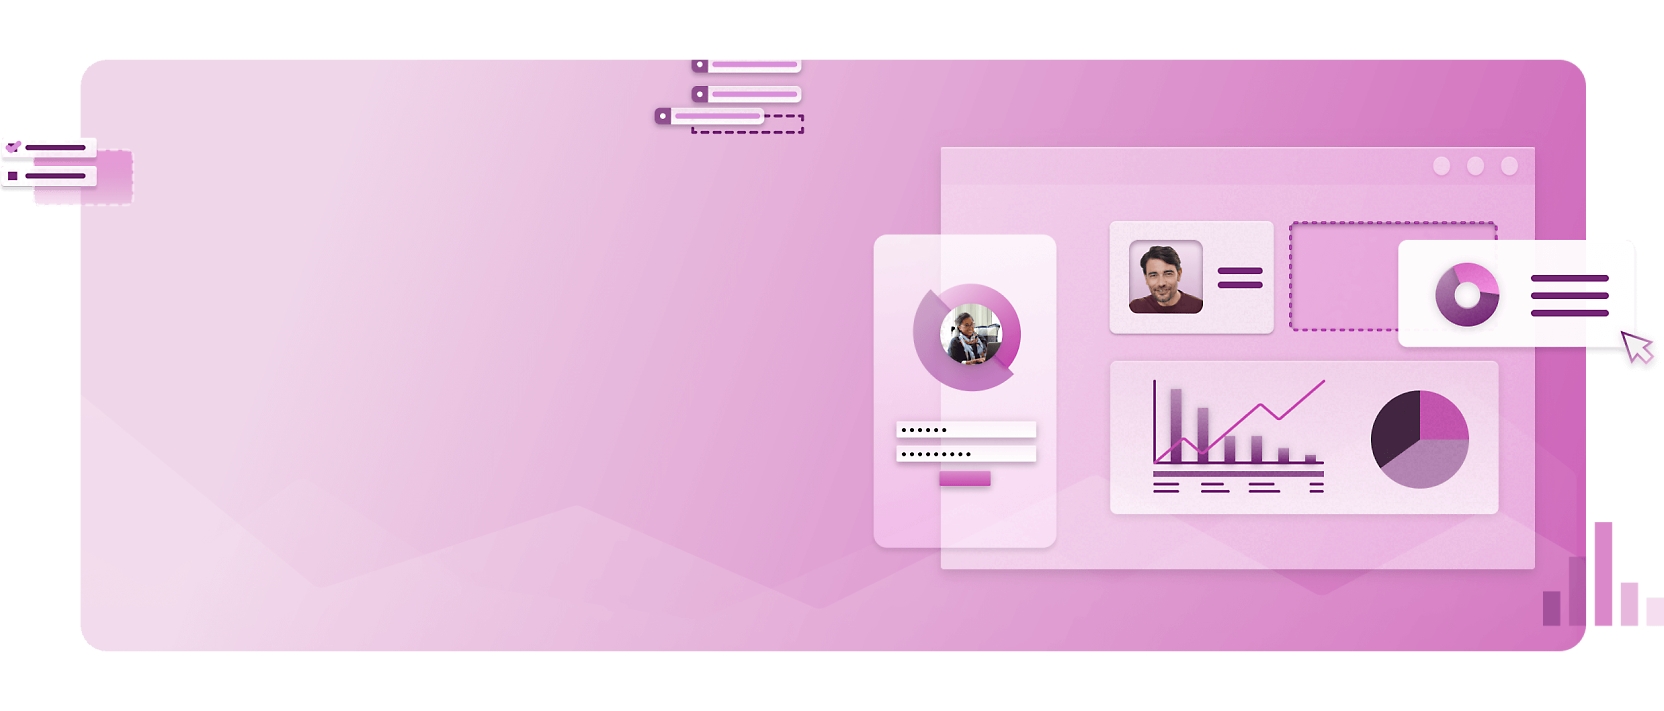 A pink background with people and graphs on it.